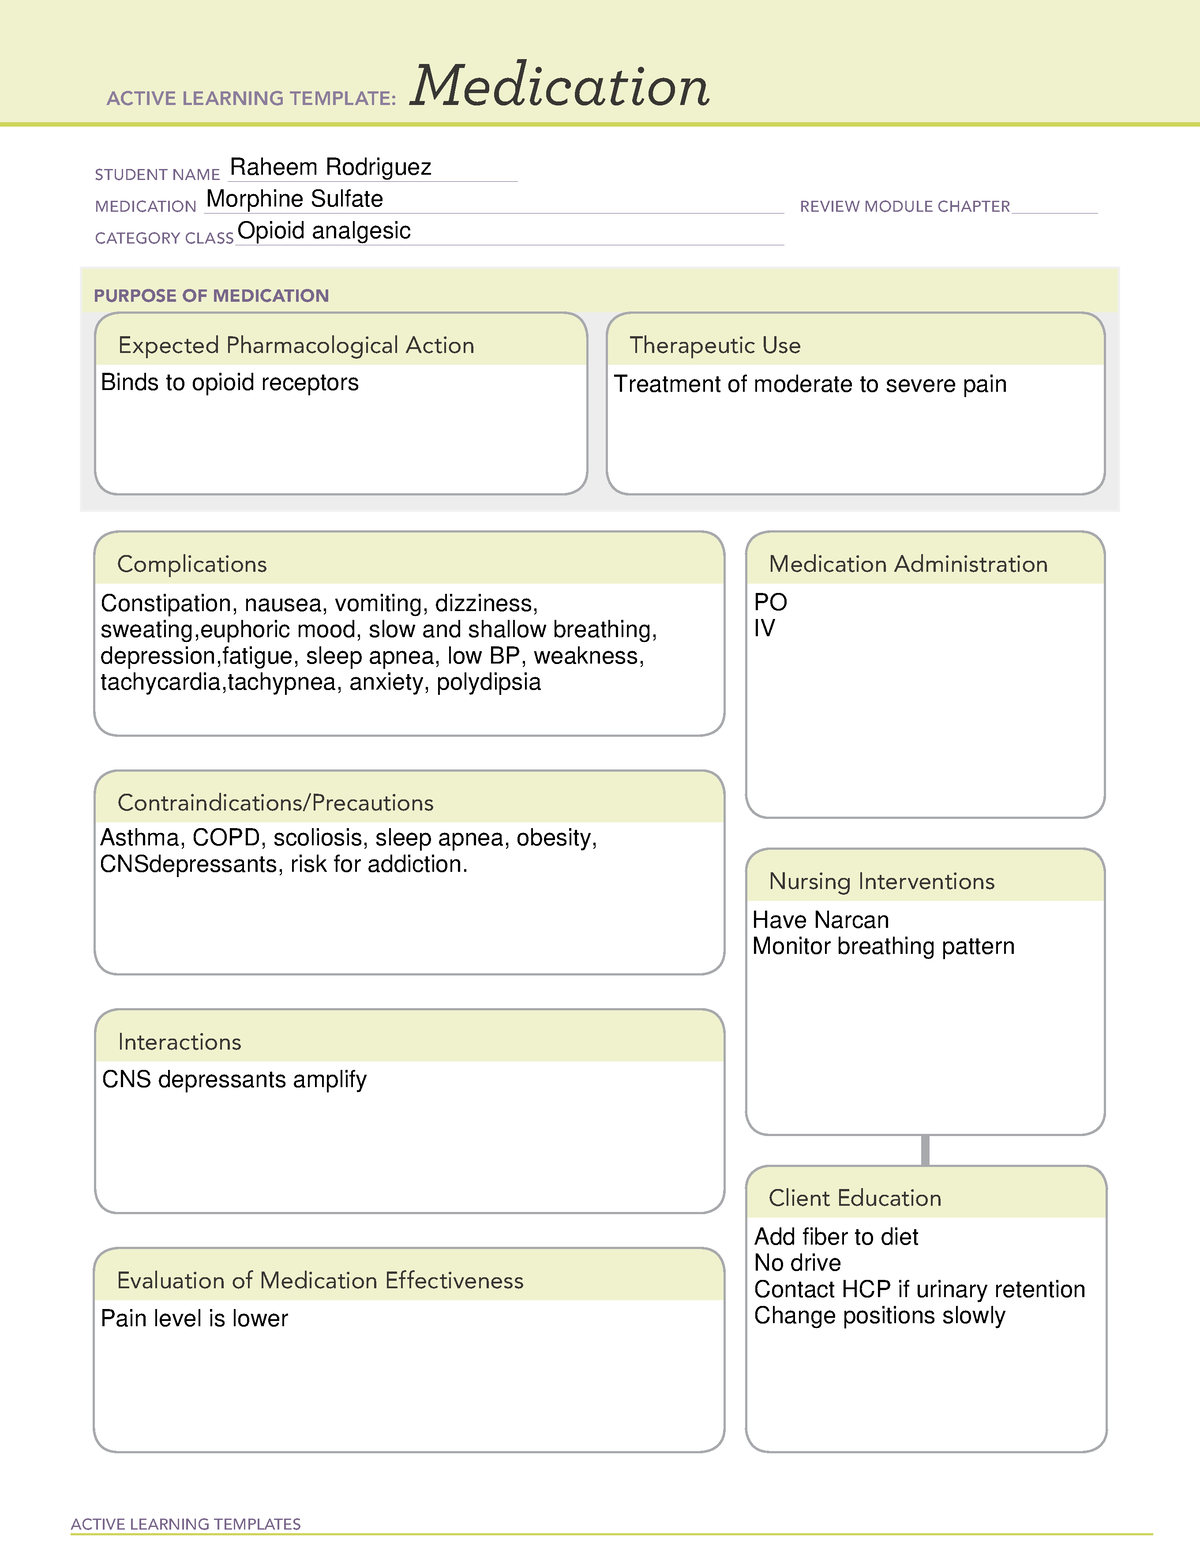 ati-medication-template-morphine-active-learning-templates-medication-student-name-studocu